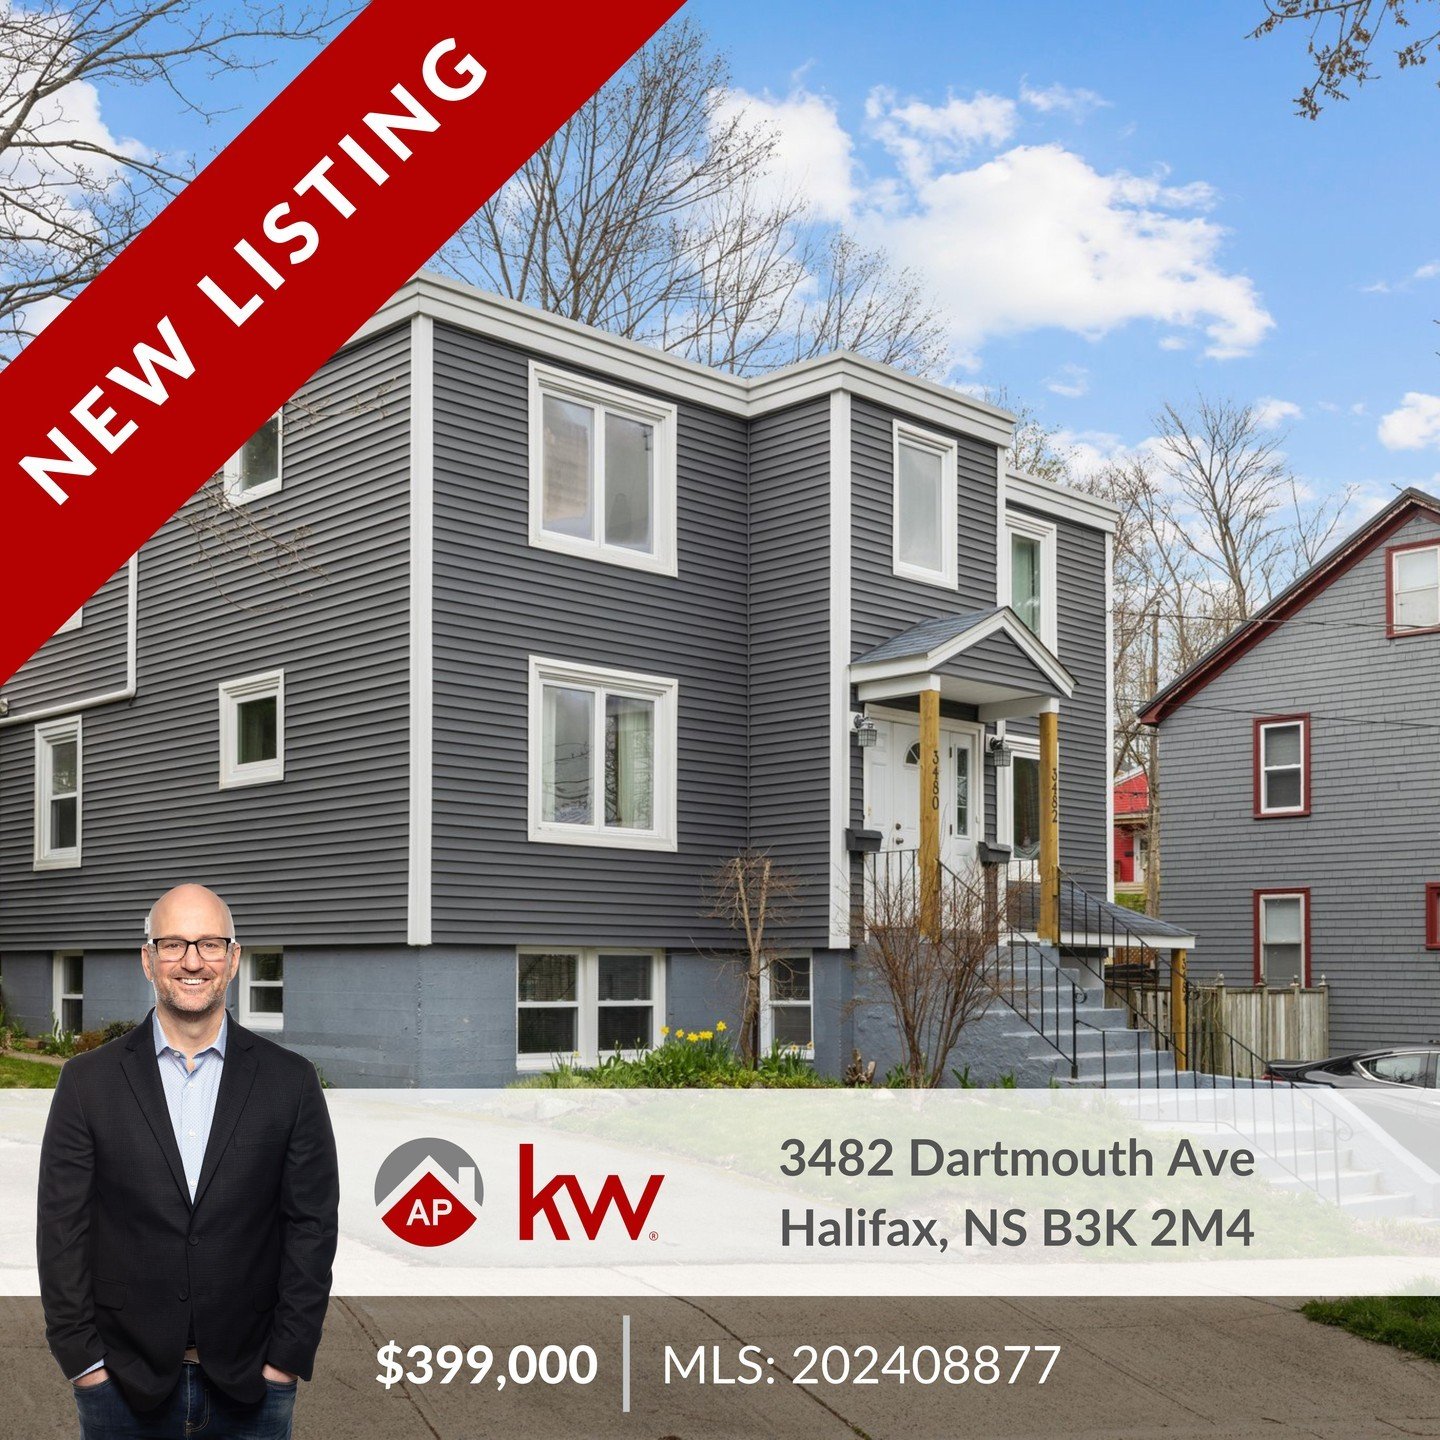 New Listing Alert! 🚨

Welcome to 3482 Dartmouth Ave! 

Nestled in the vibrant North End, this gem has been renovated top to bottom! Step into this 2 bed + den upper floor unit, featuring beautiful modern cabinetry and stainless steel appliances thro